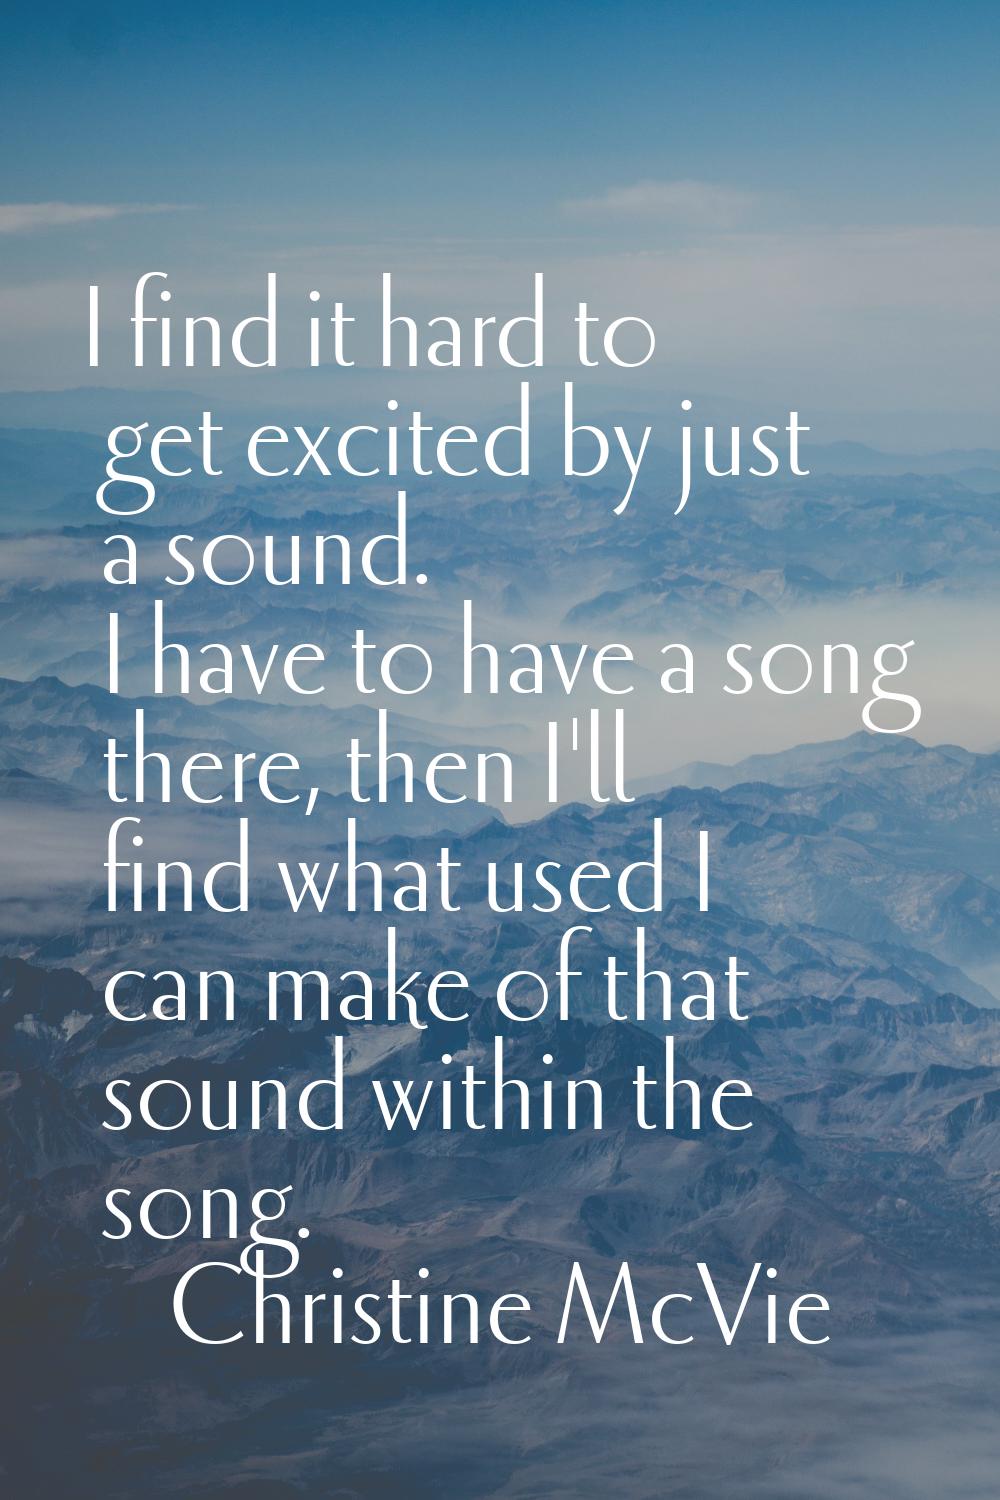 I find it hard to get excited by just a sound. I have to have a song there, then I'll find what use